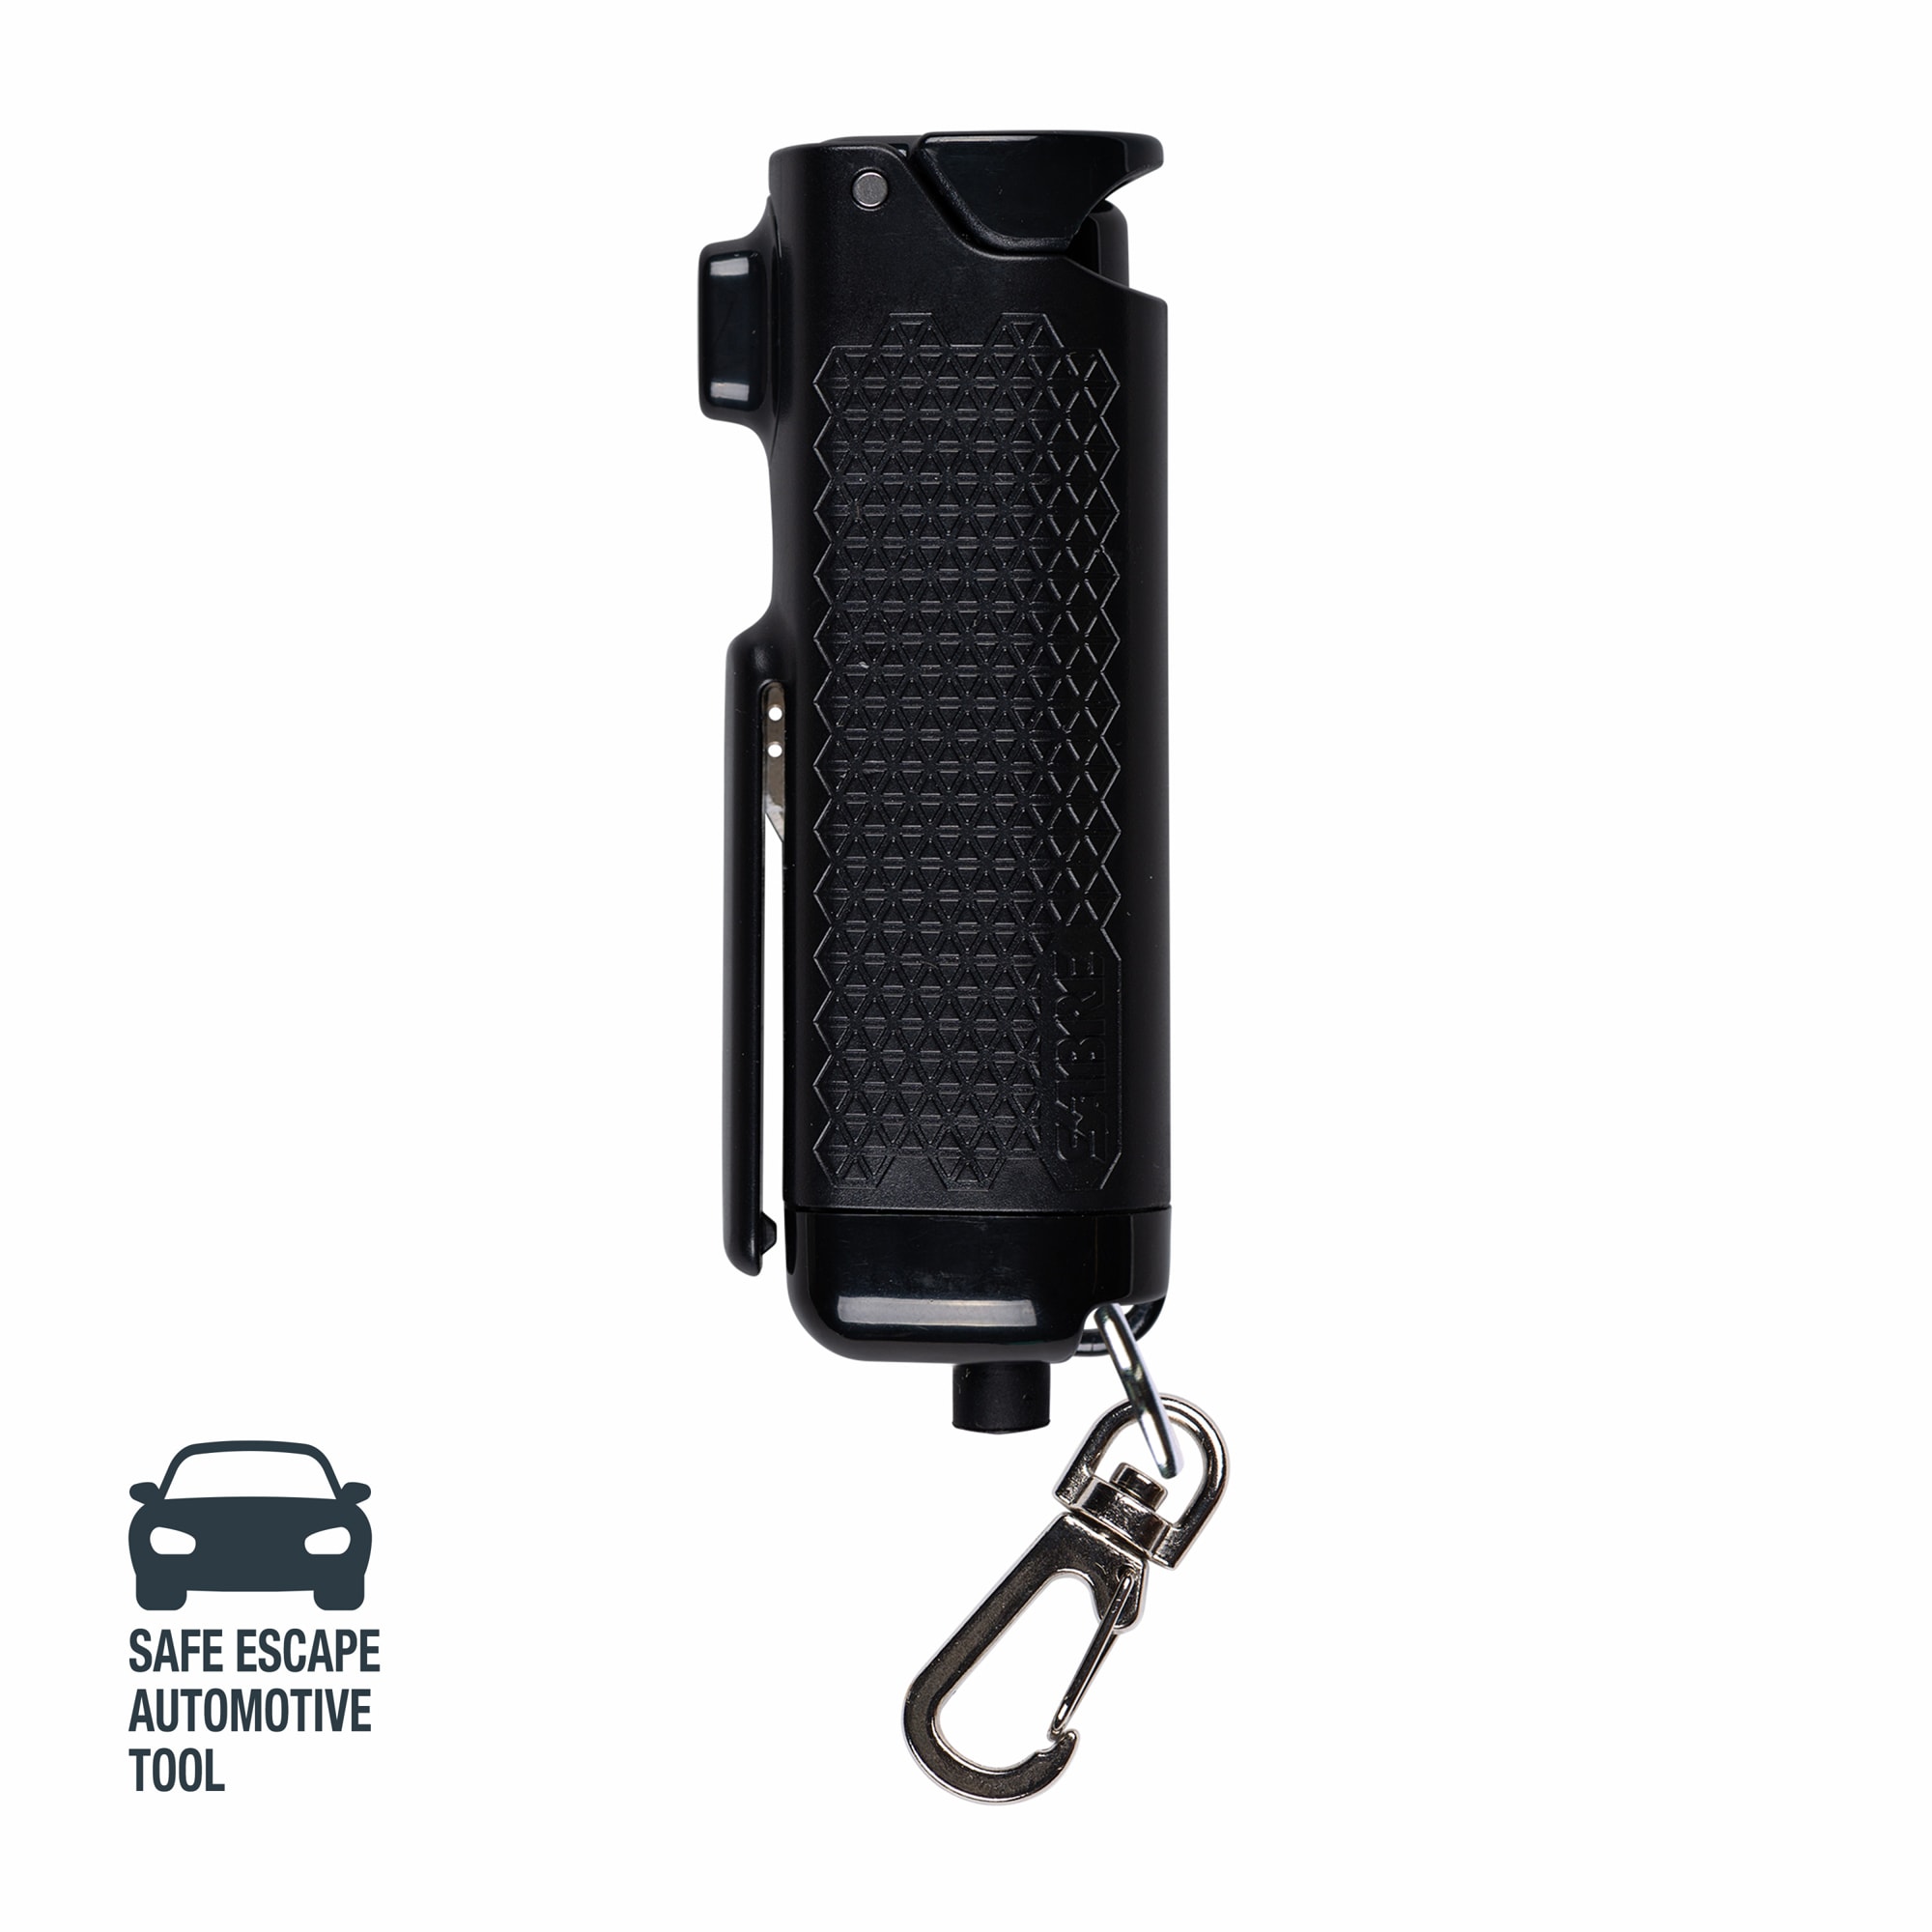 Sabre 3-In-1 Key Chain Pepper Spray Black Hardcase With Quick